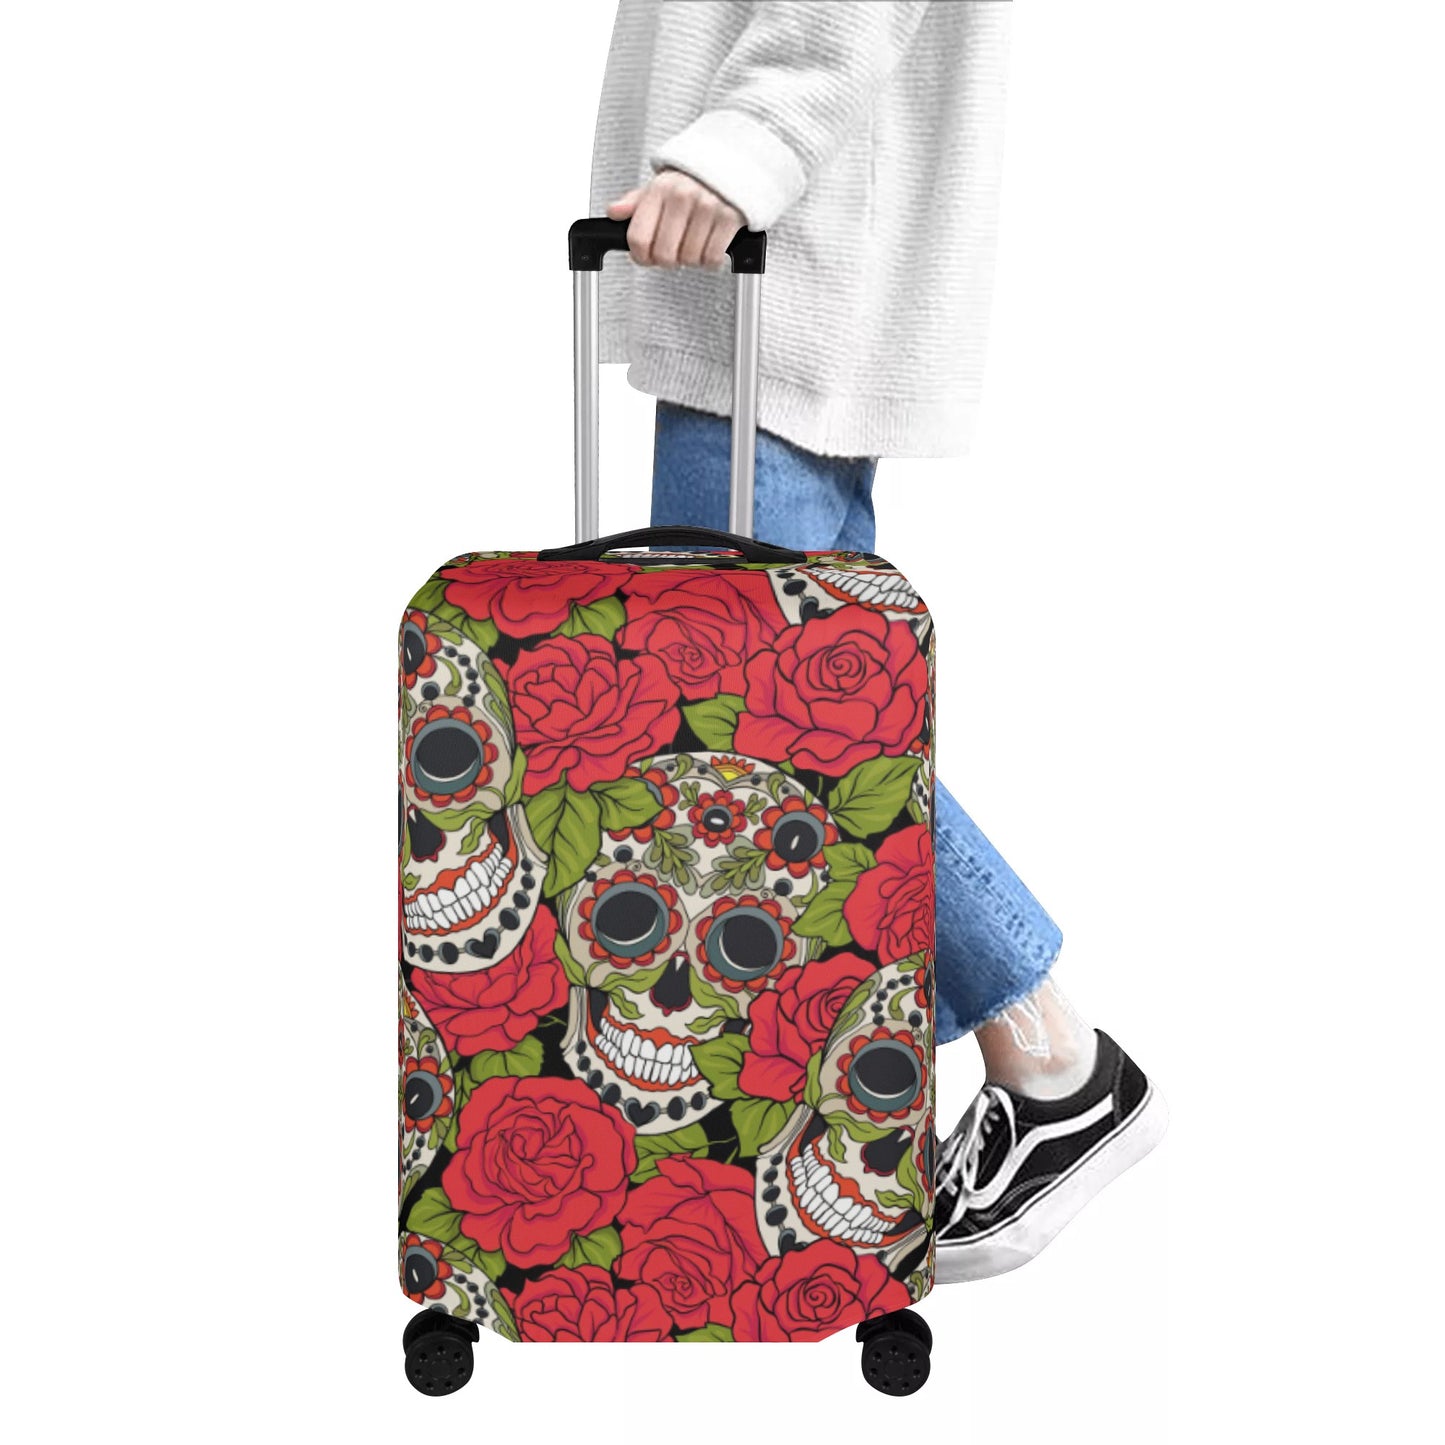 Floral rose sugar skull Polyester Luggage Cover